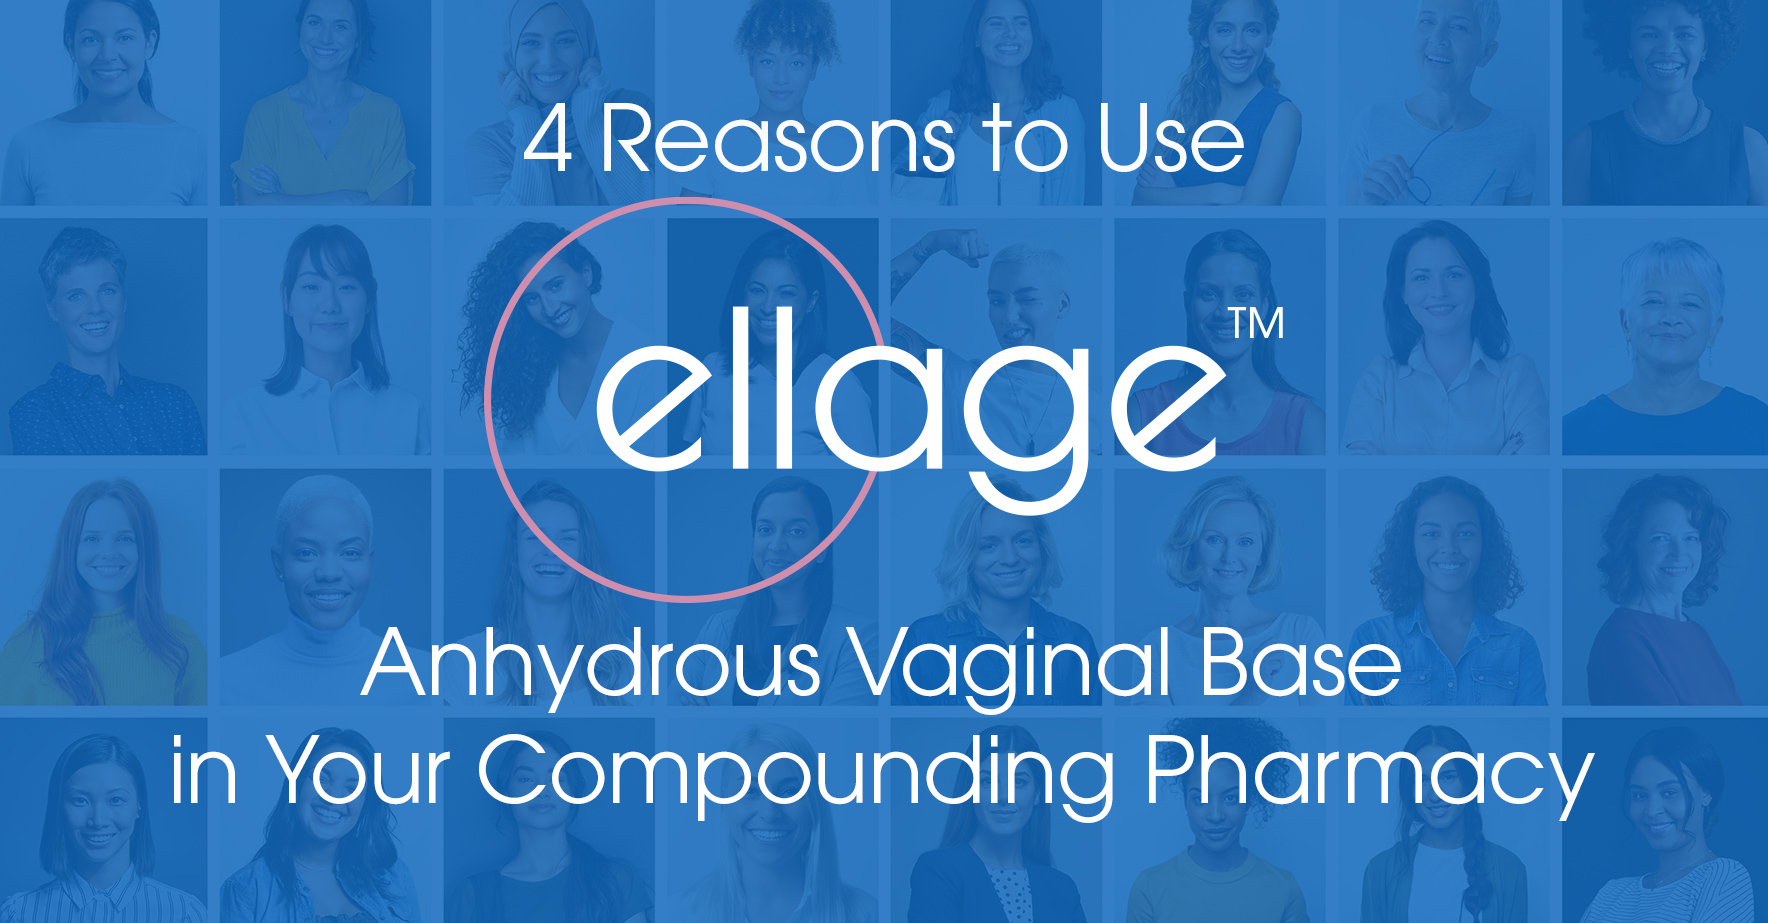 4 _reasons_to_use_ellage_anhydrous_vaginal_base_in_your_compounding_pharmacy.jpg